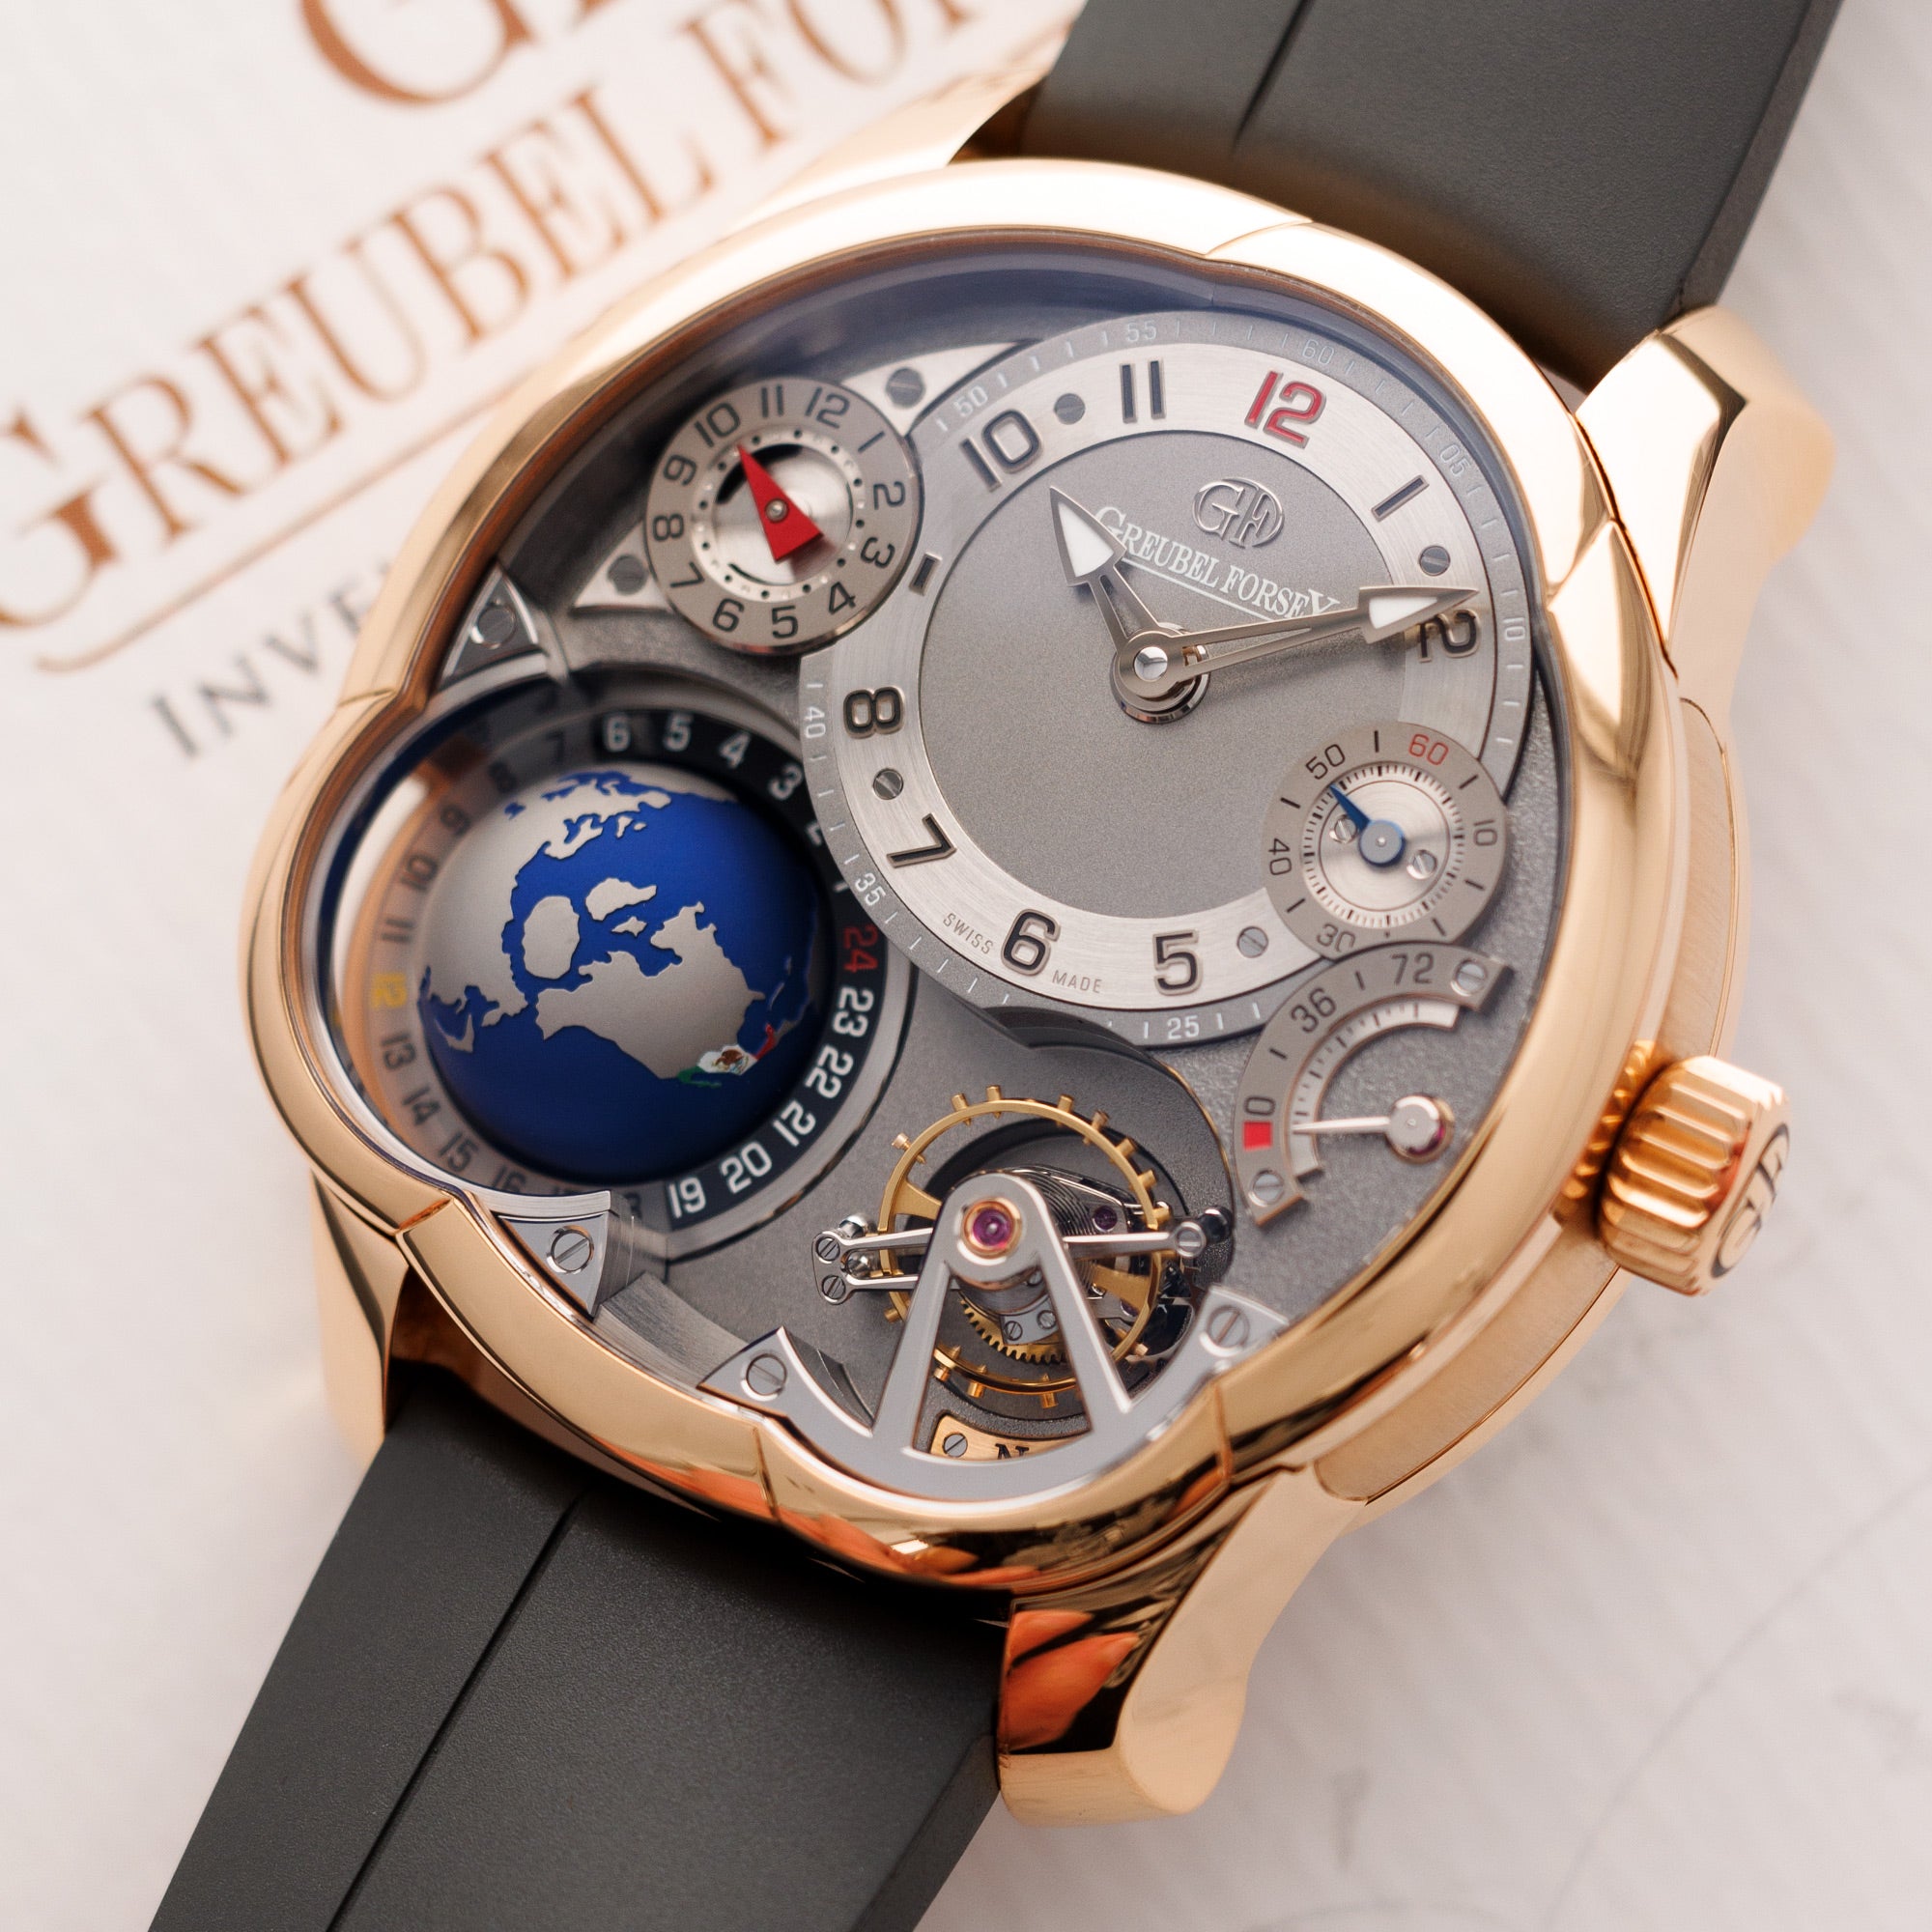 Greubel Forsey - Greubel Forsey Rose Gold GMT Globe GF05 97805 Tourbillon - The Keystone Watches